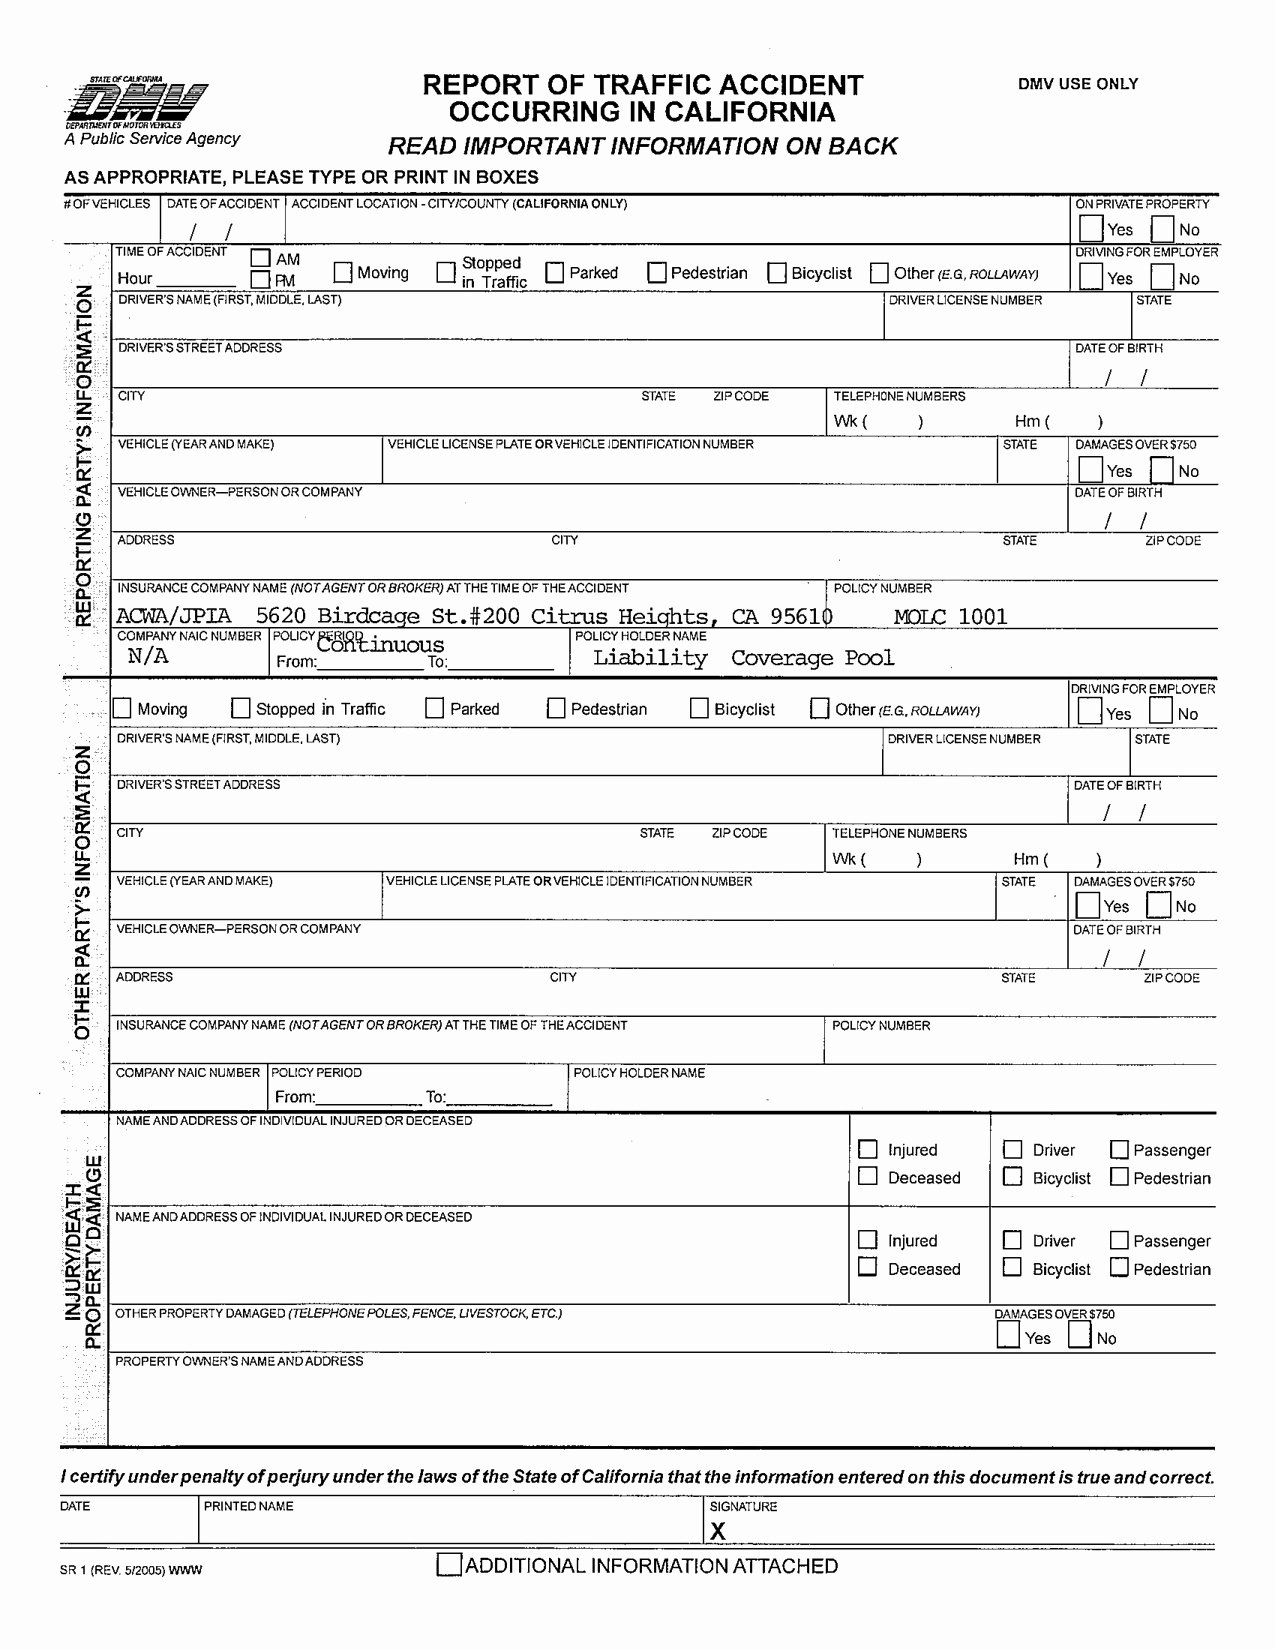 Fake Accident Report Template Fresh Fake Police Report Car Accident